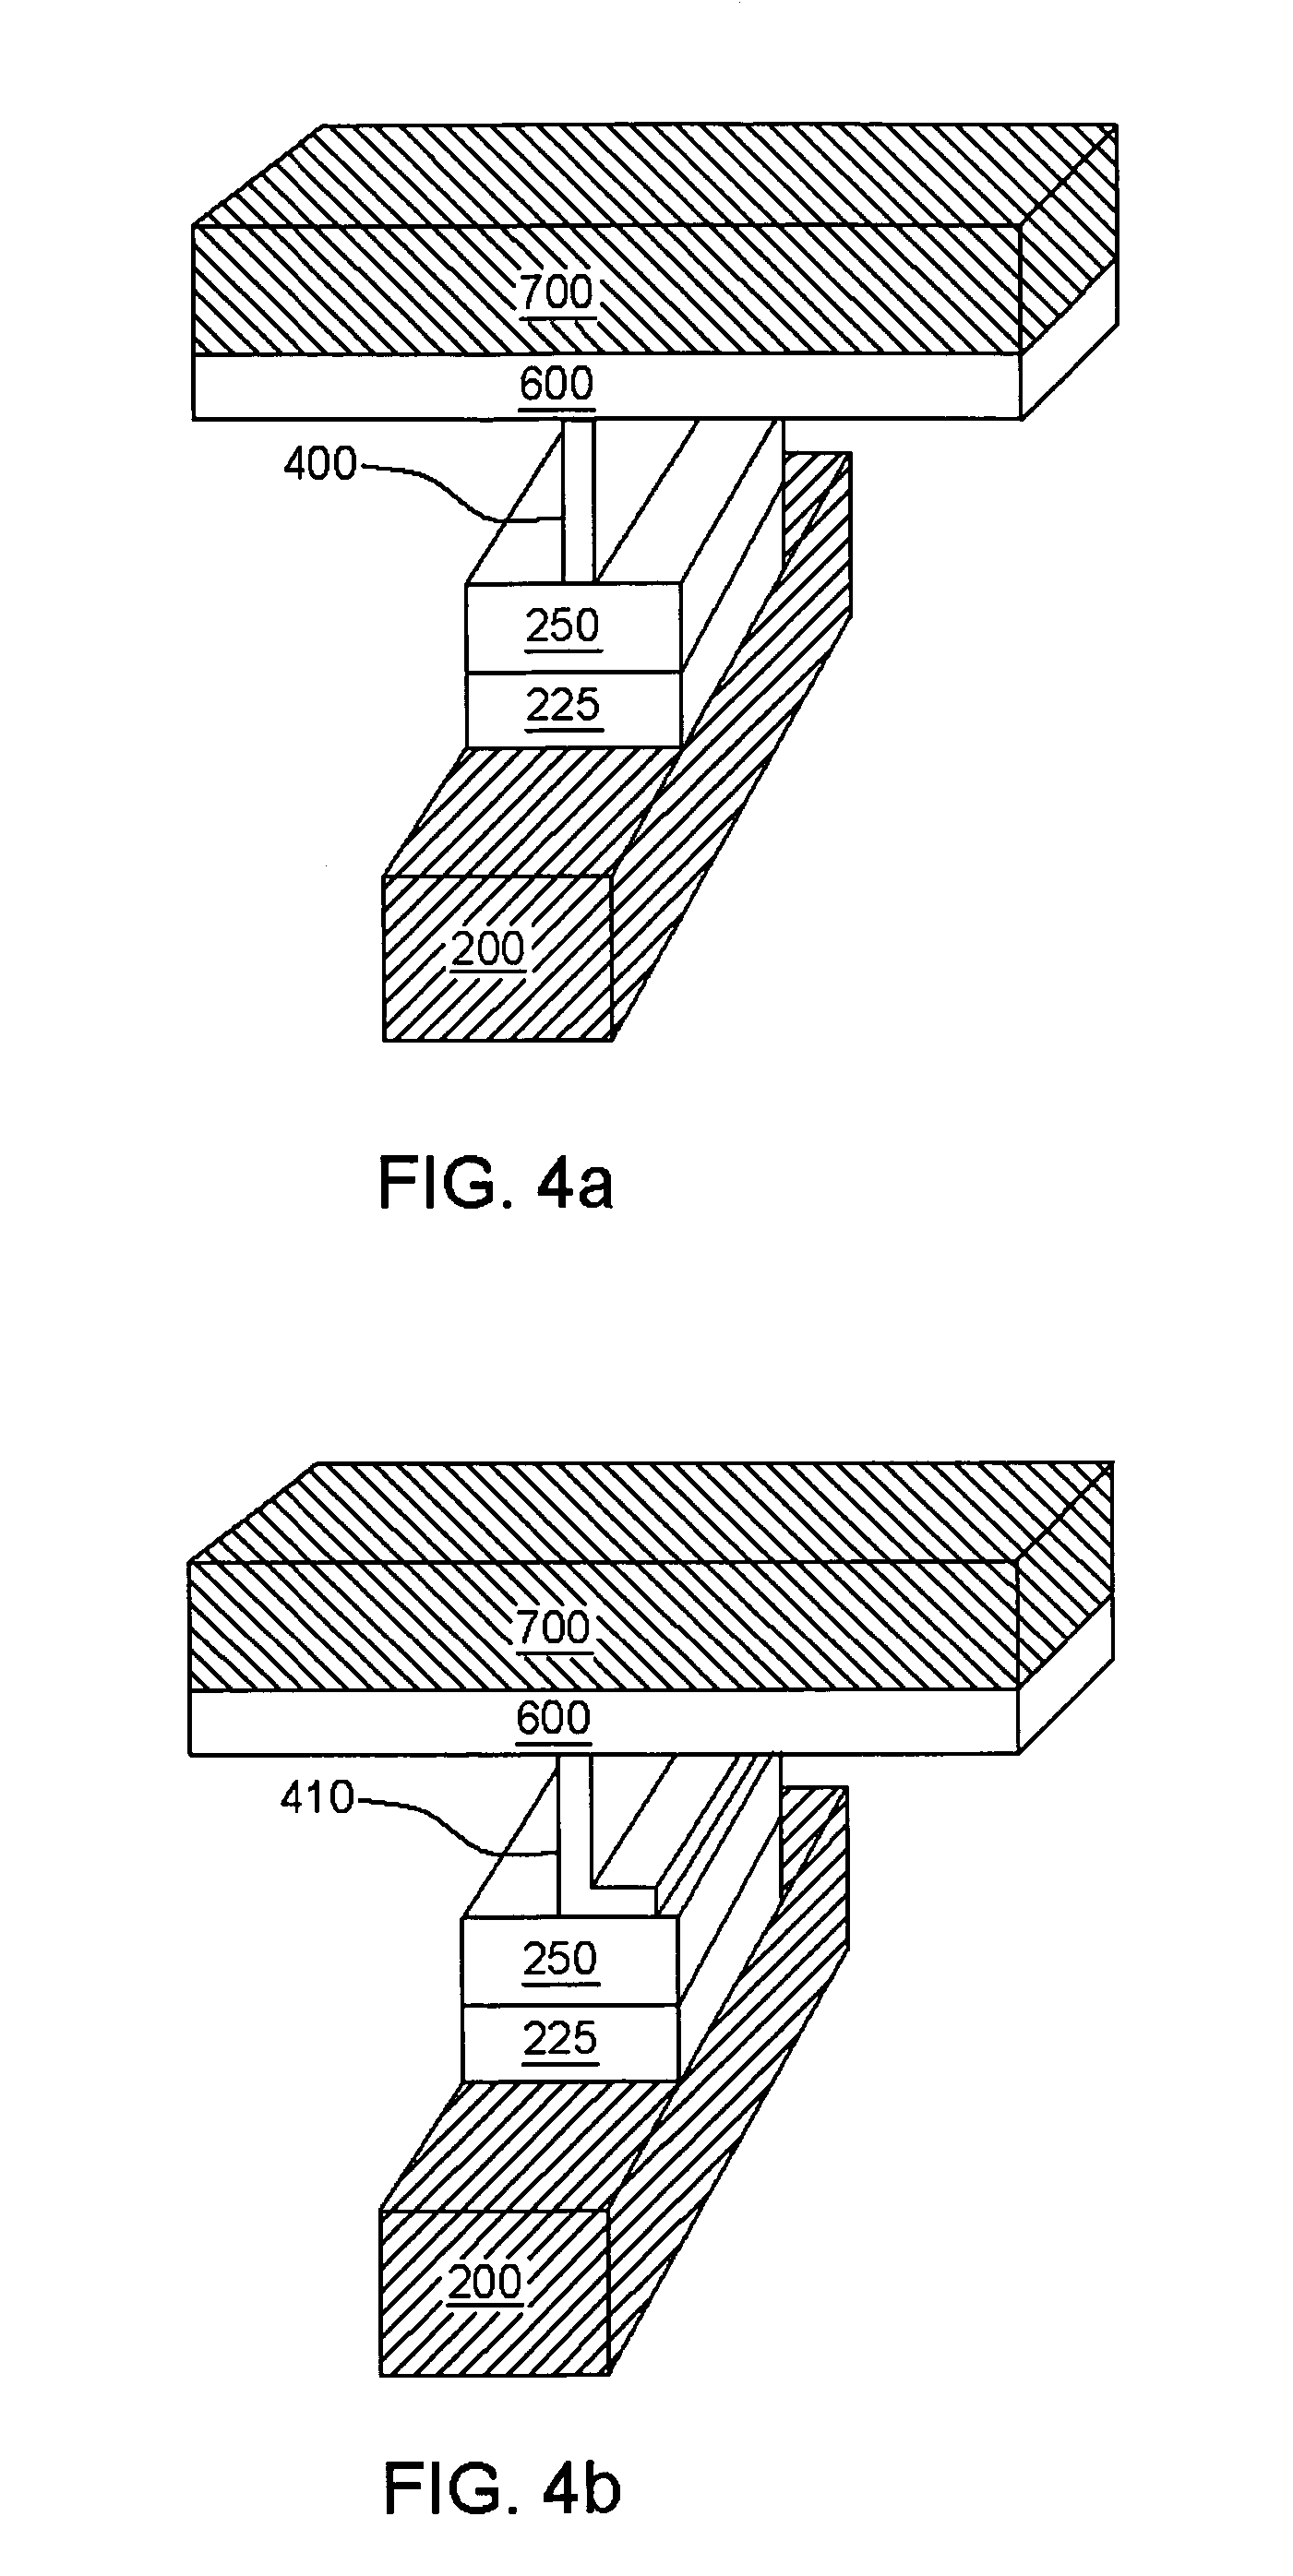 I-shaped and L-shaped contact structures and their fabrication methods